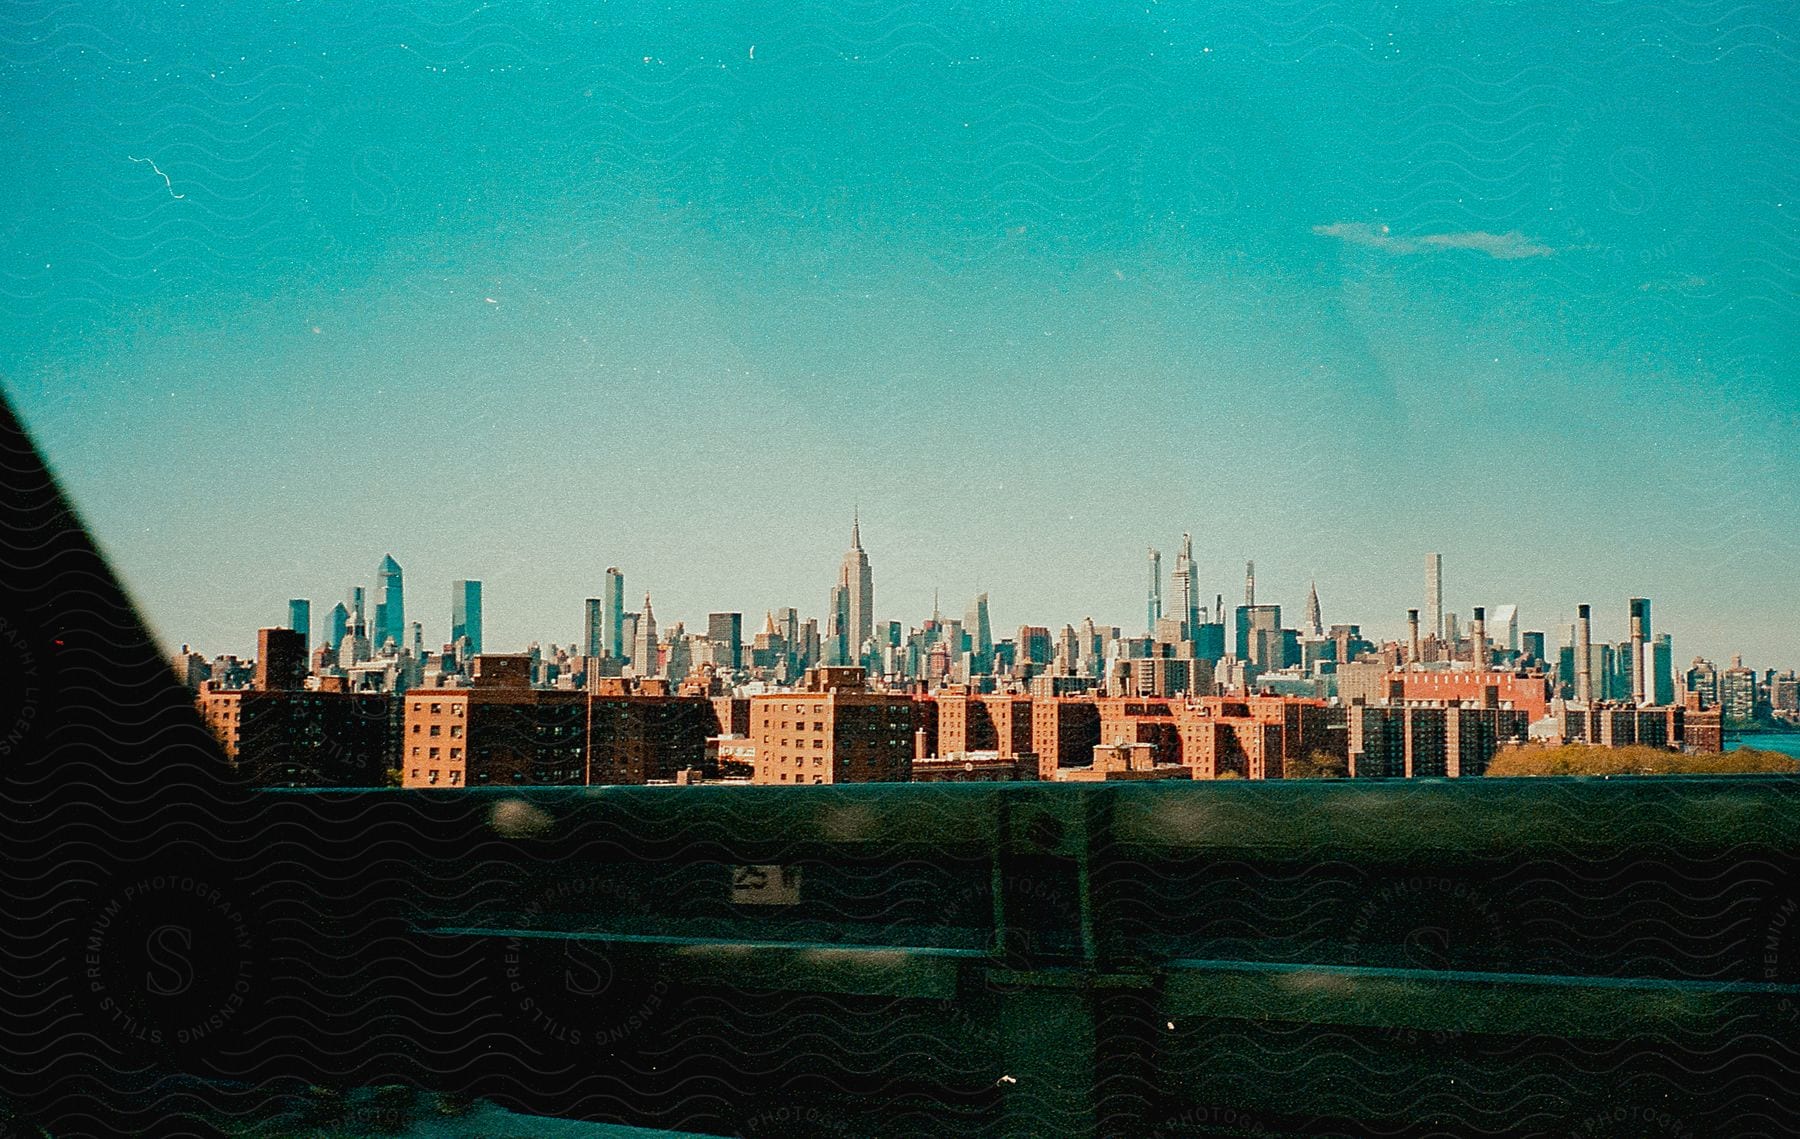 City skyline with high rise buildings and the williamsburg bridge in the distance